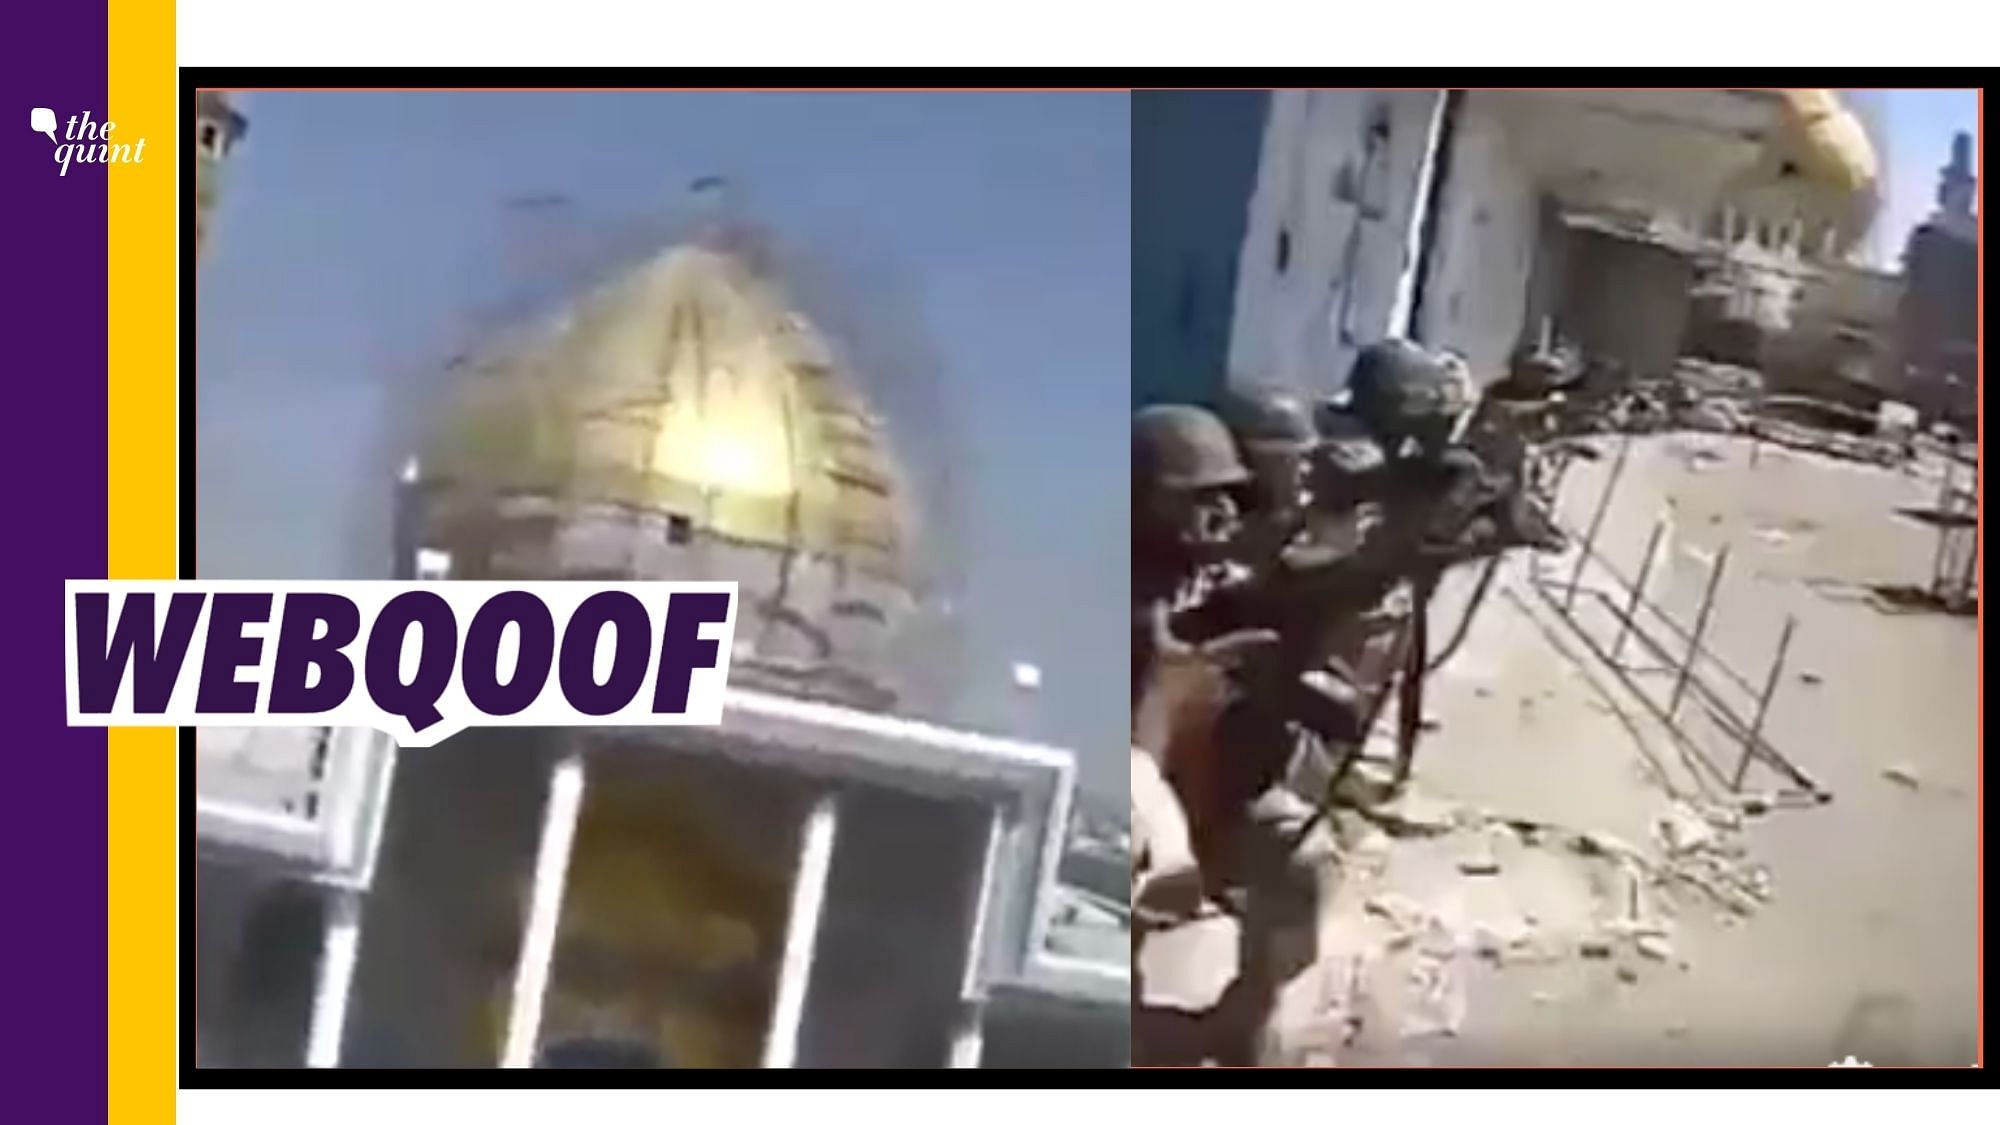 A viral video of troops carrying out an operation on a mosque complex is being shared to falsely claim that the Israeli forces have taken over the Al-Aqsa mosque in Jerusalem.